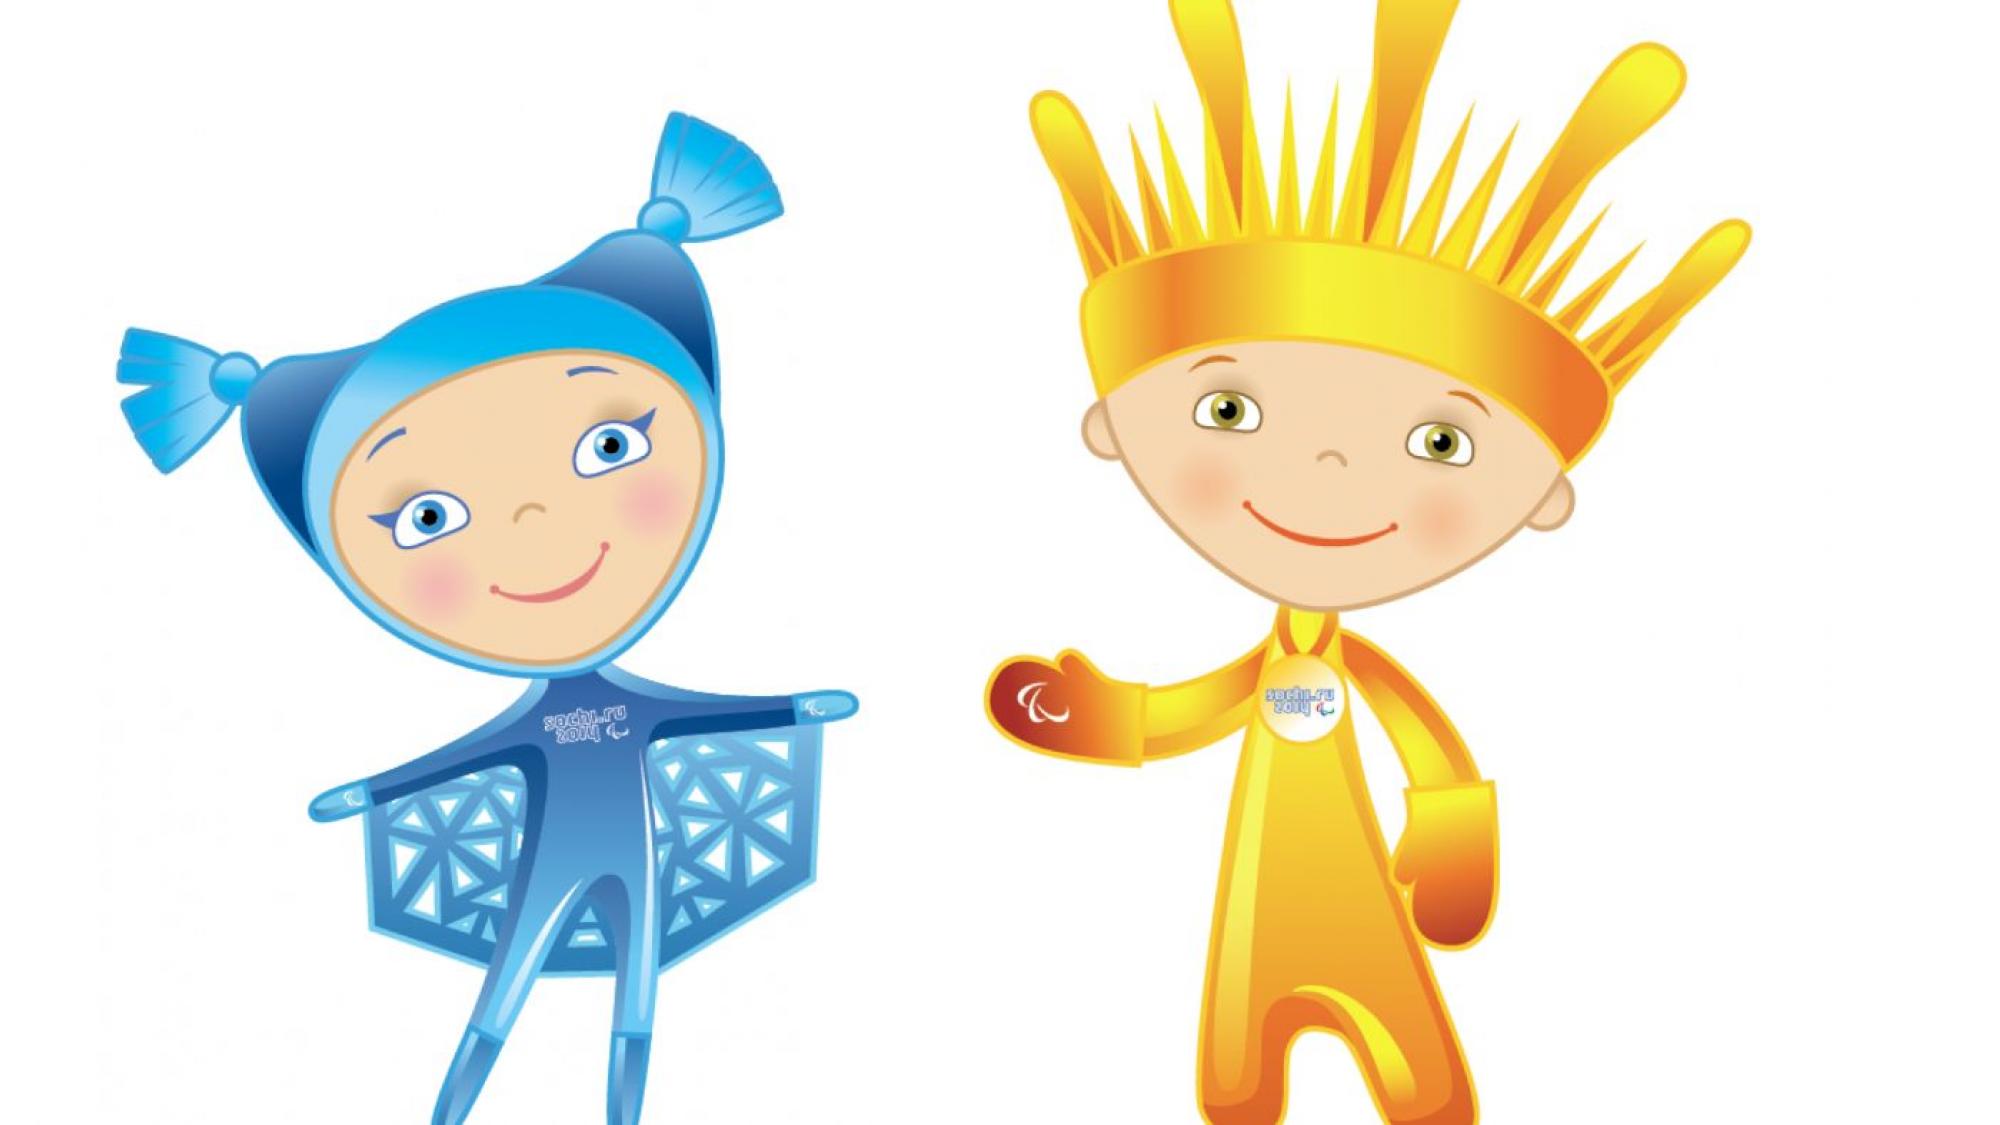 Two mascots from the Sochi 2014 Paralympic Games, a blue girl and a yellow boy with spiky hair